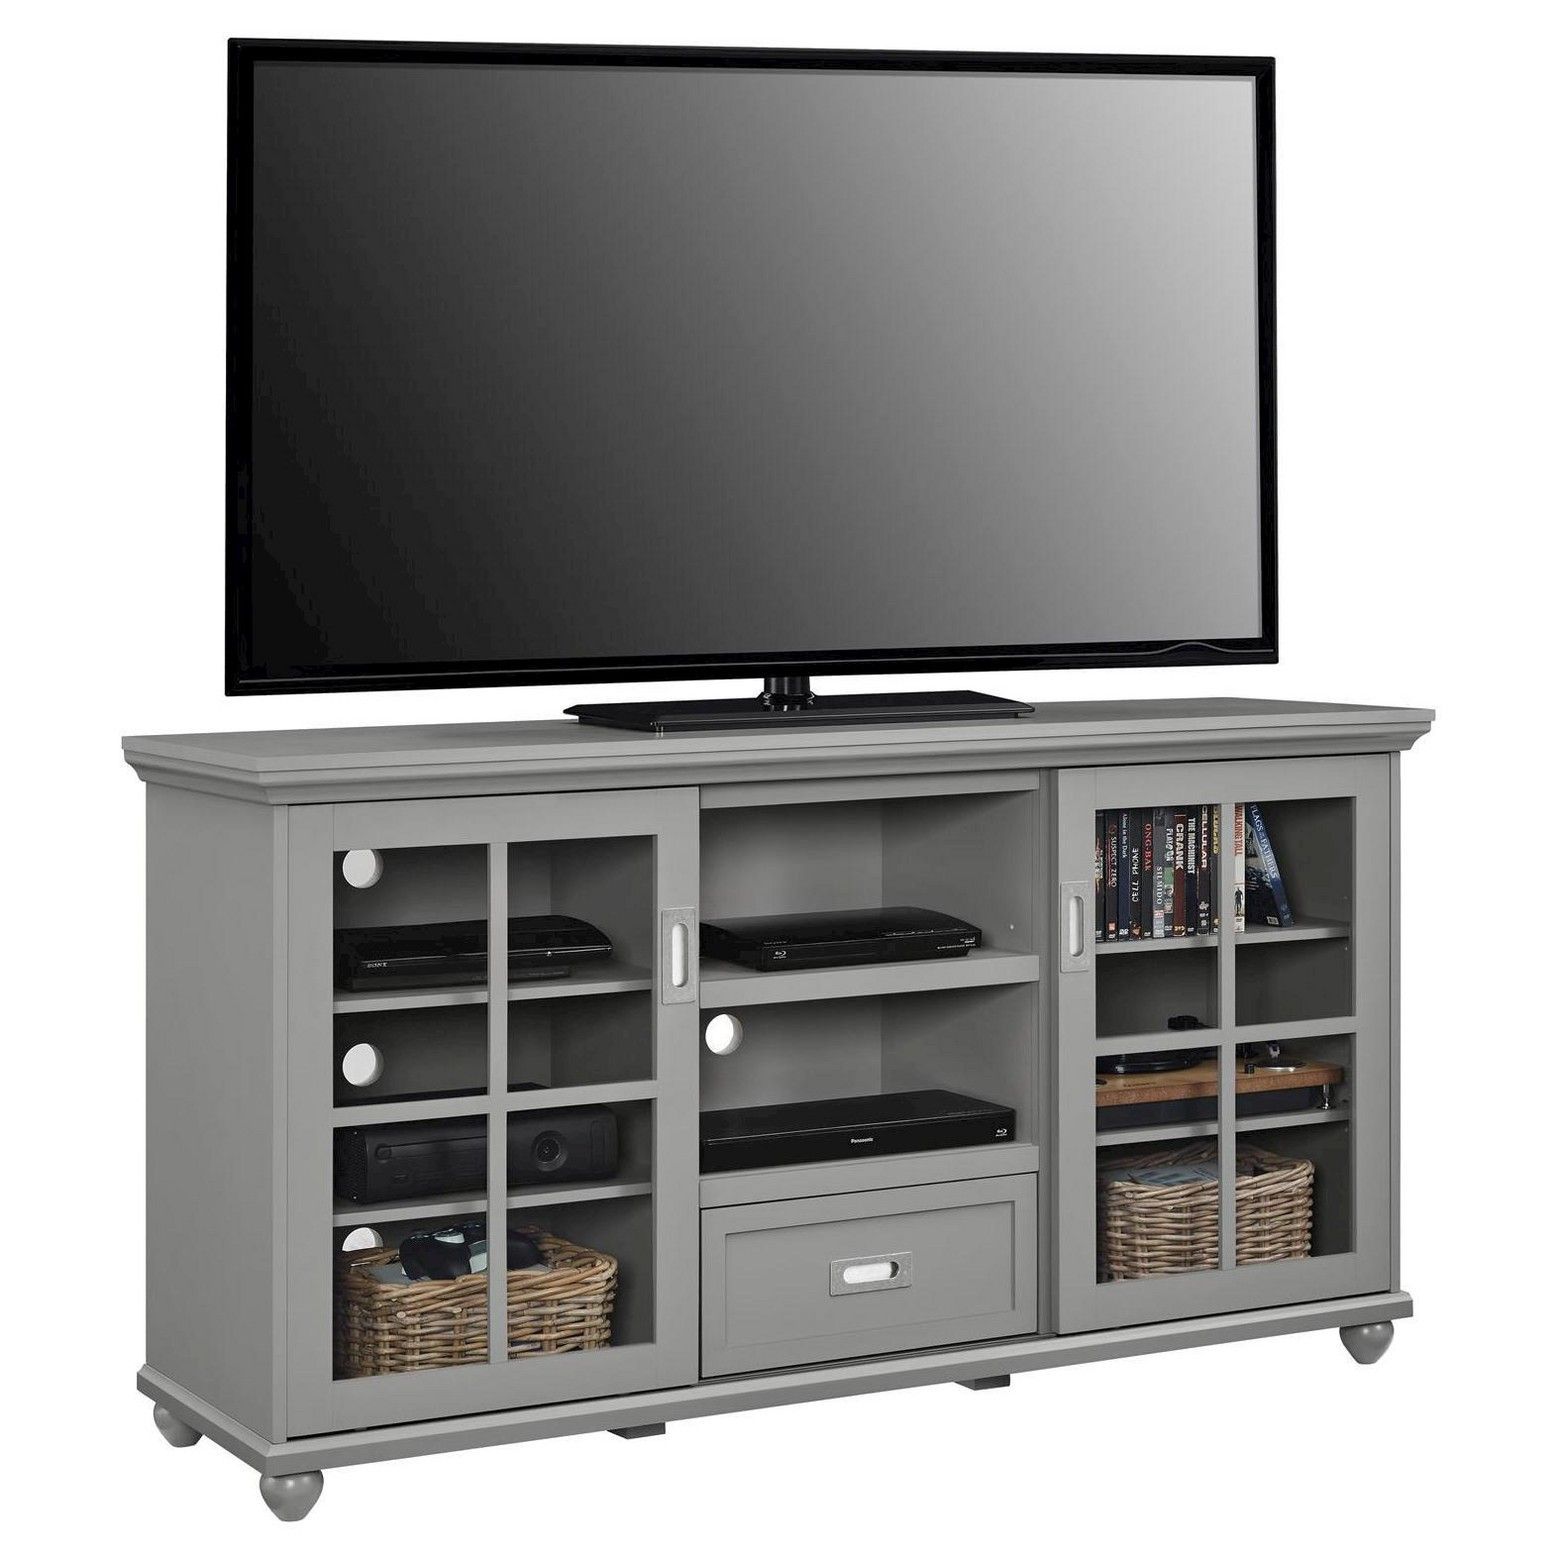 Aaron Lane 55" Tv Console With Doors – Altra | Tv Stand Throughout Lane Tv Stands (View 13 of 15)